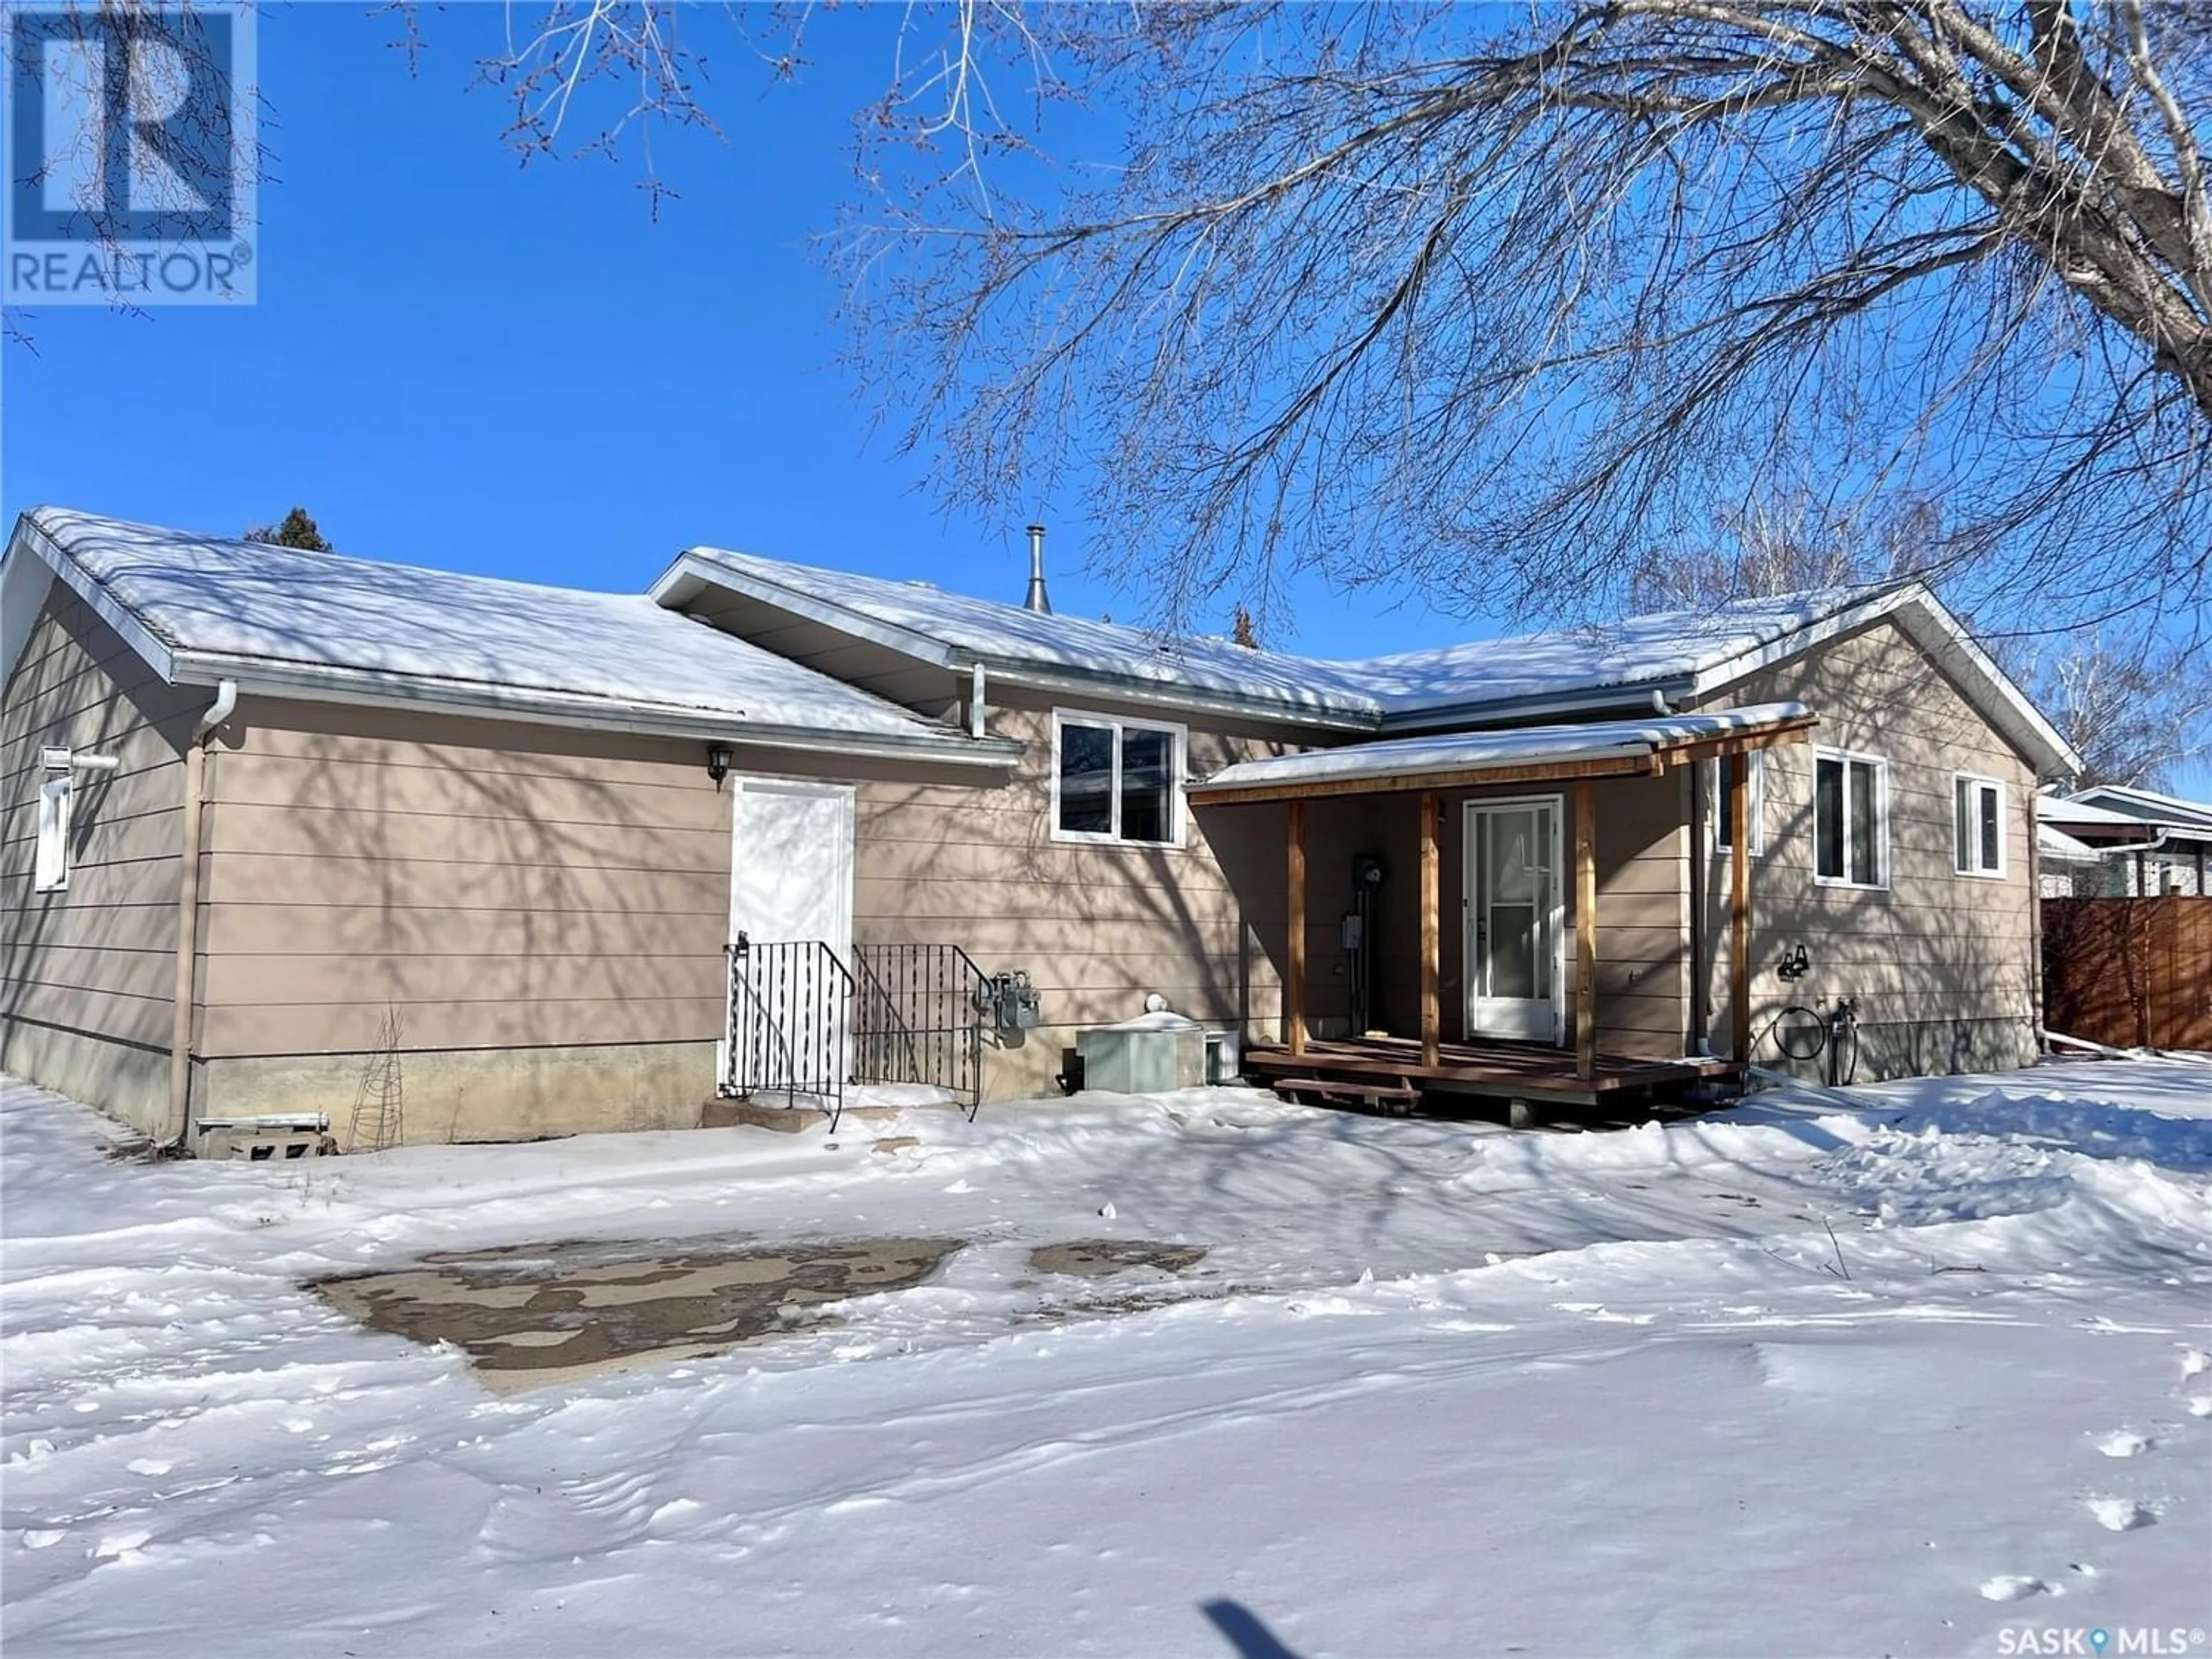 Home with unknown exterior material for 37 Carter CRESCENT, Outlook Saskatchewan S0L2N0